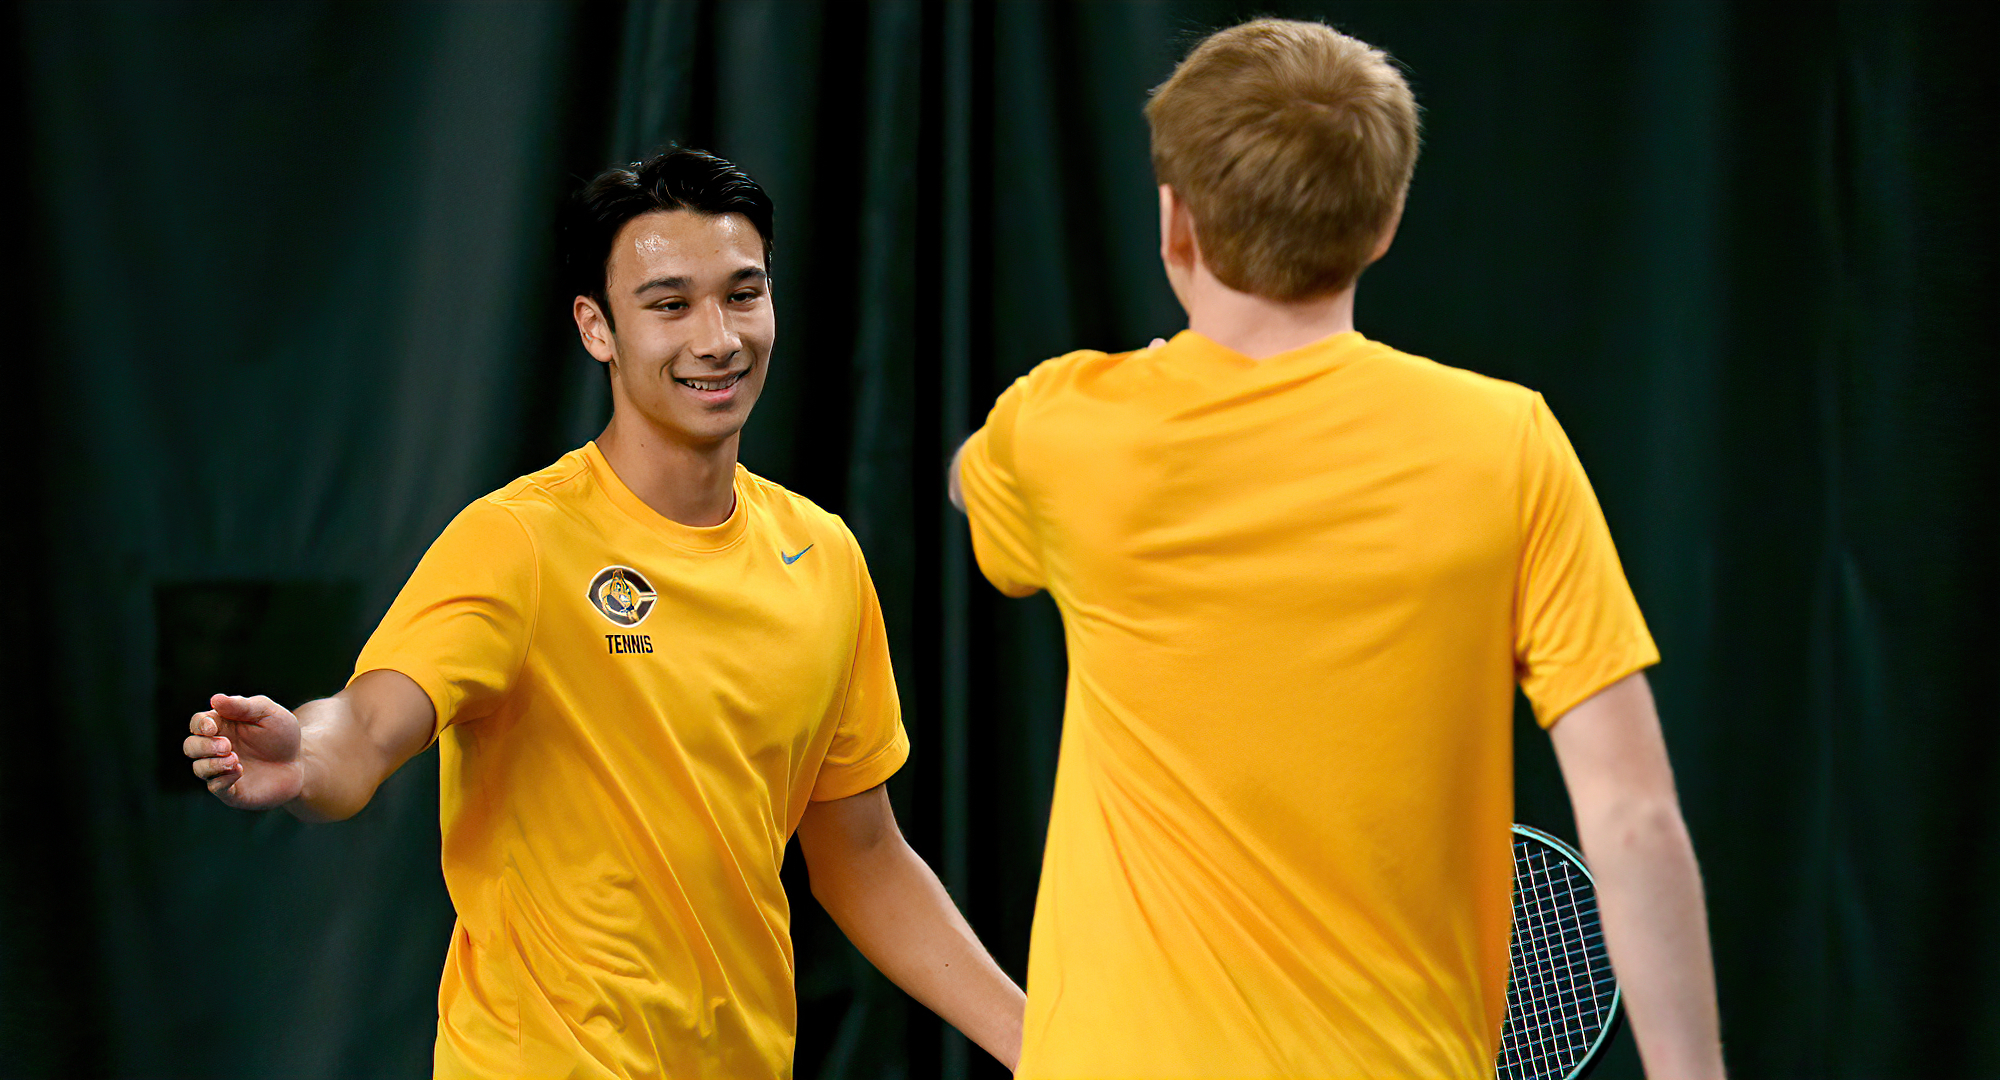 The doubles team of Kai Pierce (L) and Isaac Maddock celebrate winning a point against Macalester. They won both their matches over the weekend.